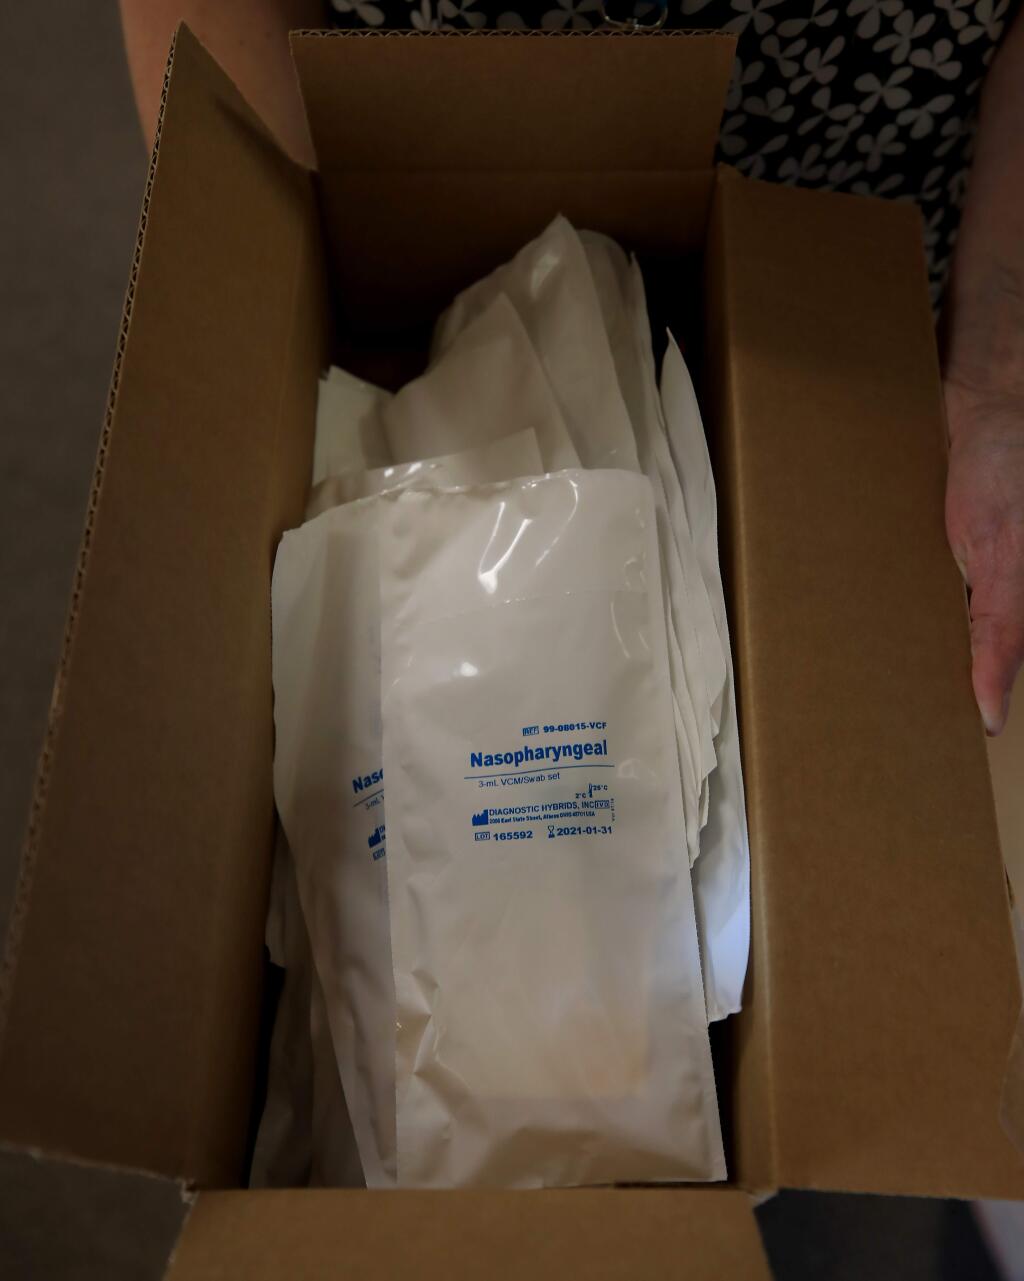 At Healdsburg Physicians Group, swab kits were received, Thursday, March 12, 2020, that when used, will be sent to a lab for processing for COVID-19. (Kent Porter / The Press Democrat) 2020